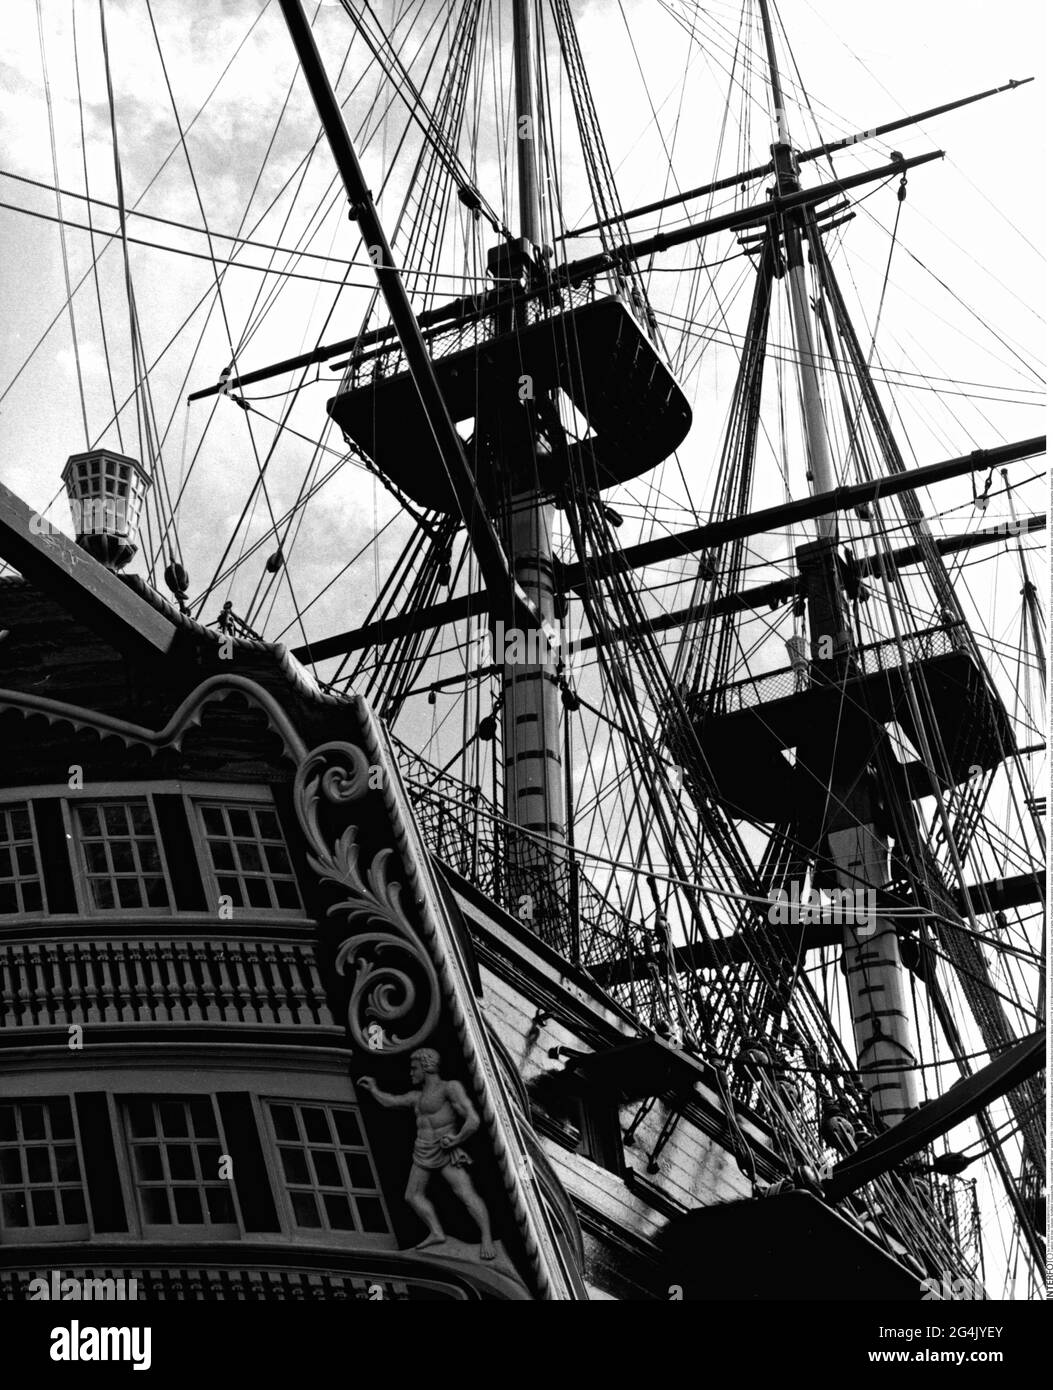 transport / transportation, navigation, warships, ship of the line HMS 'Victory', ADDITIONAL-RIGHTS-CLEARANCE-INFO-NOT-AVAILABLE Stock Photo